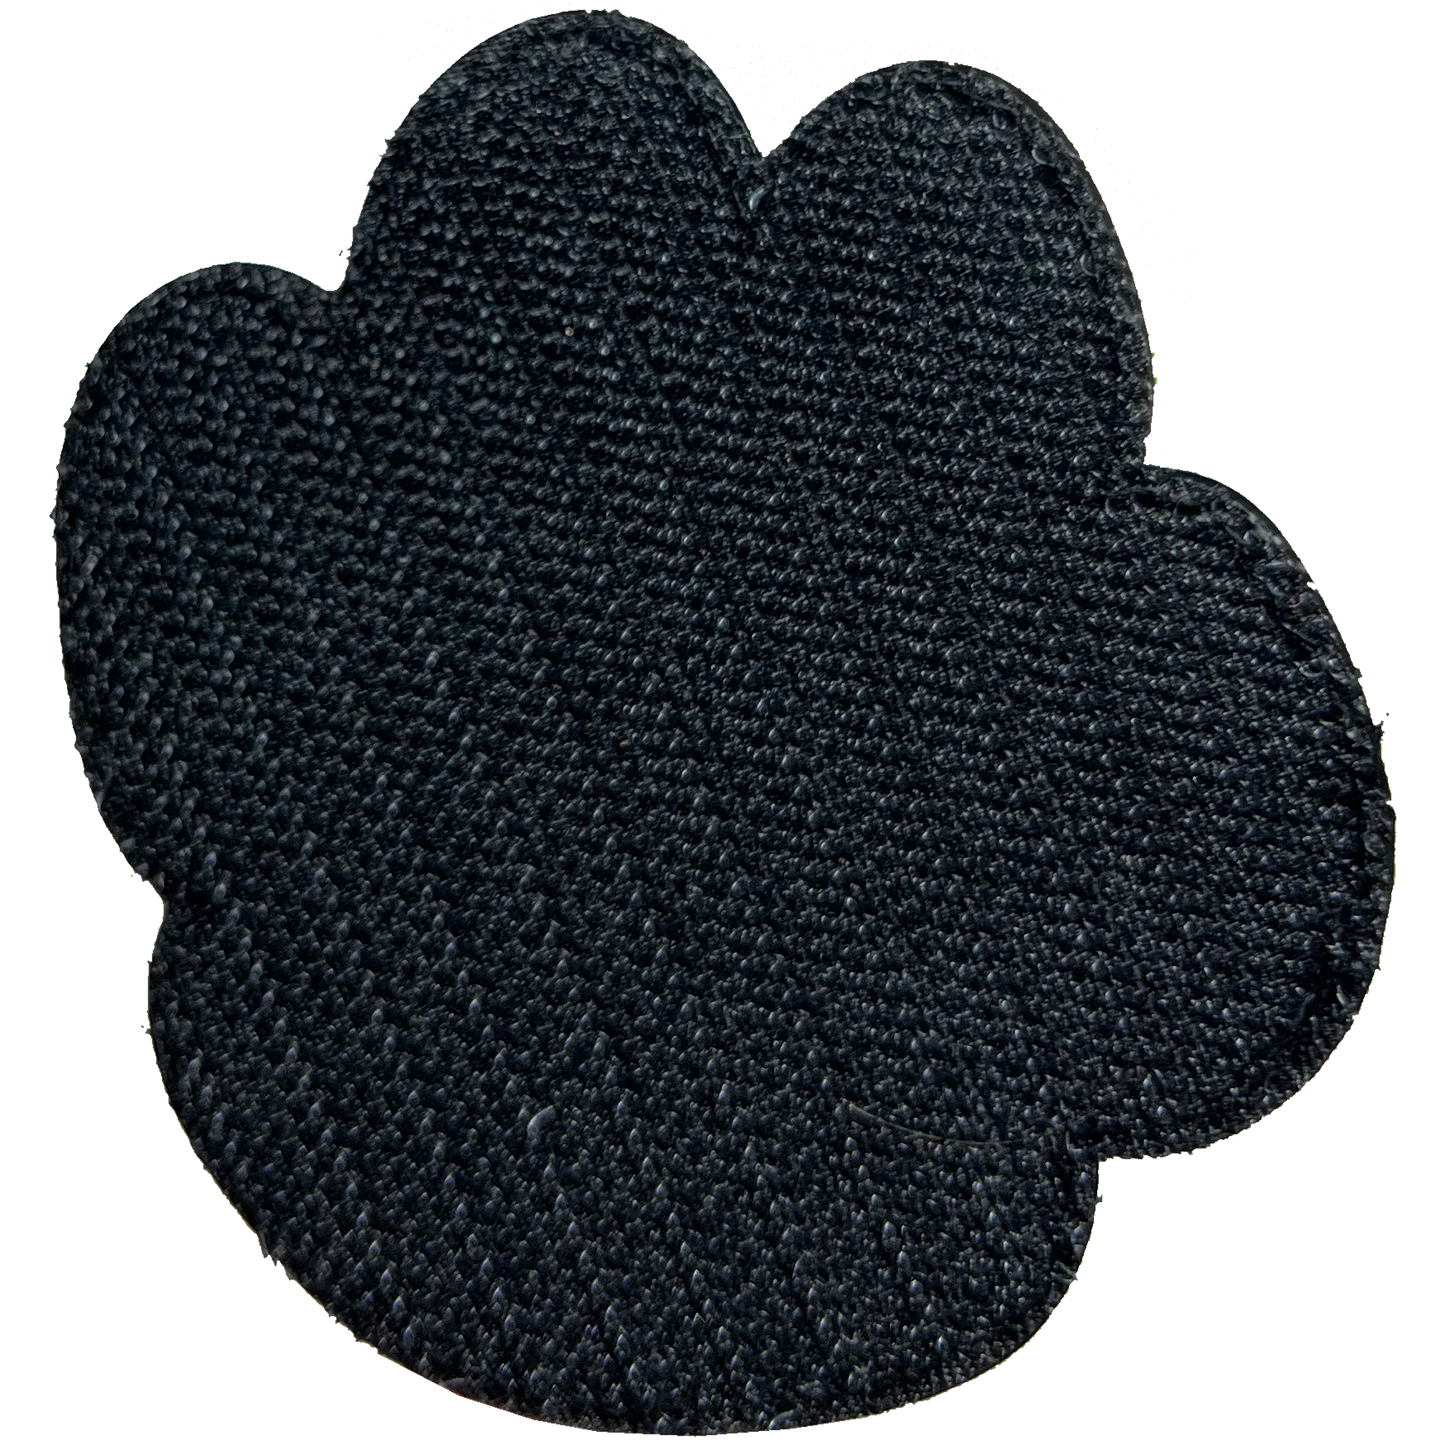 BL5-024 Police Thin Blue Line K9 Canine Rubber Silicone Morale Patch large 3 inch with hook and loop